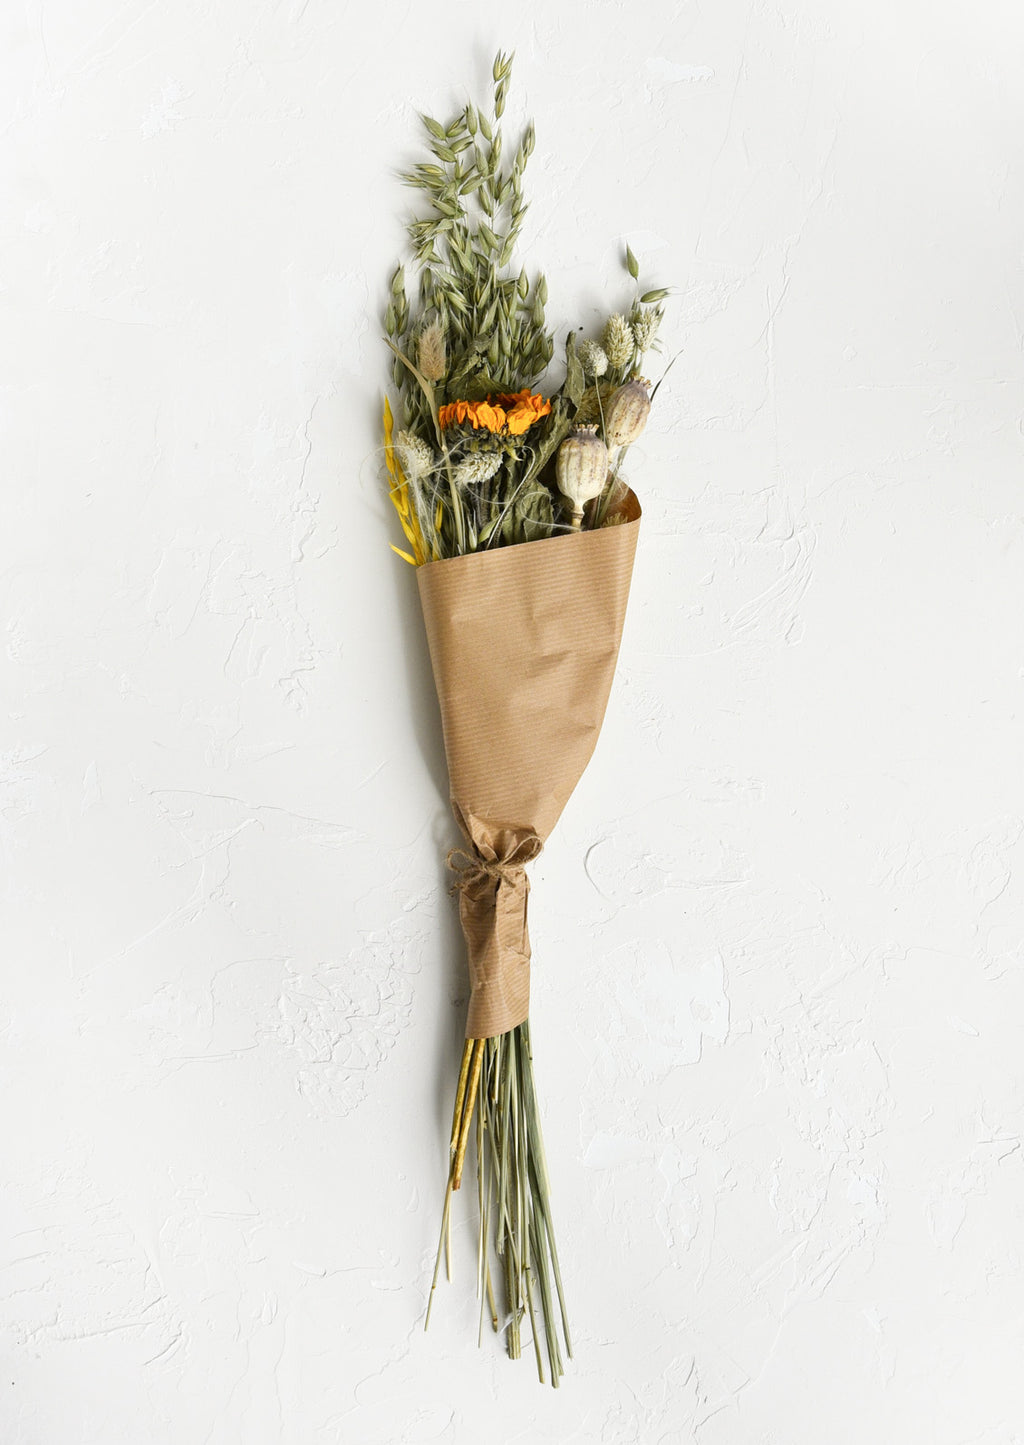 Sage Multi: A dried floral bouquet in tones of sage green with hints of yellow.